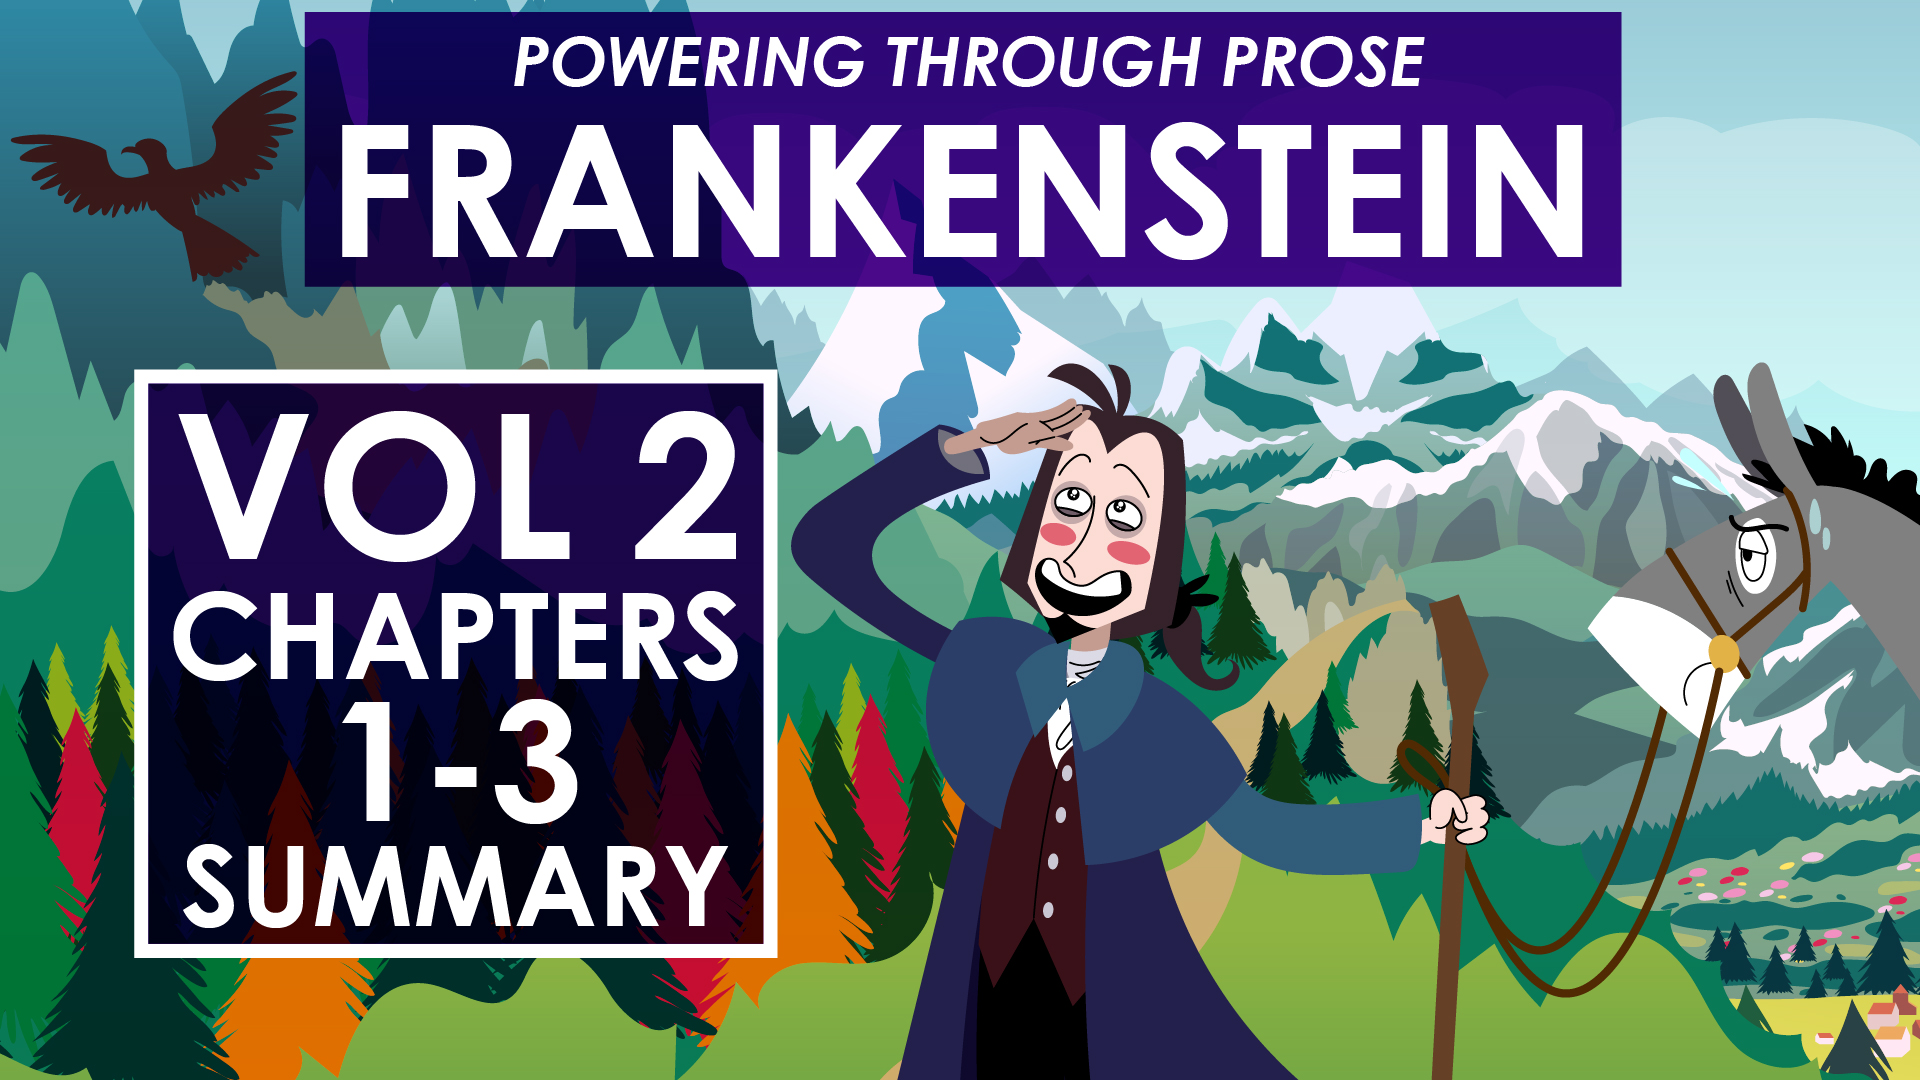 Frankenstein - Mary Shelley - Volume 2 Chapters 1-3 - Powering Through Prose Series